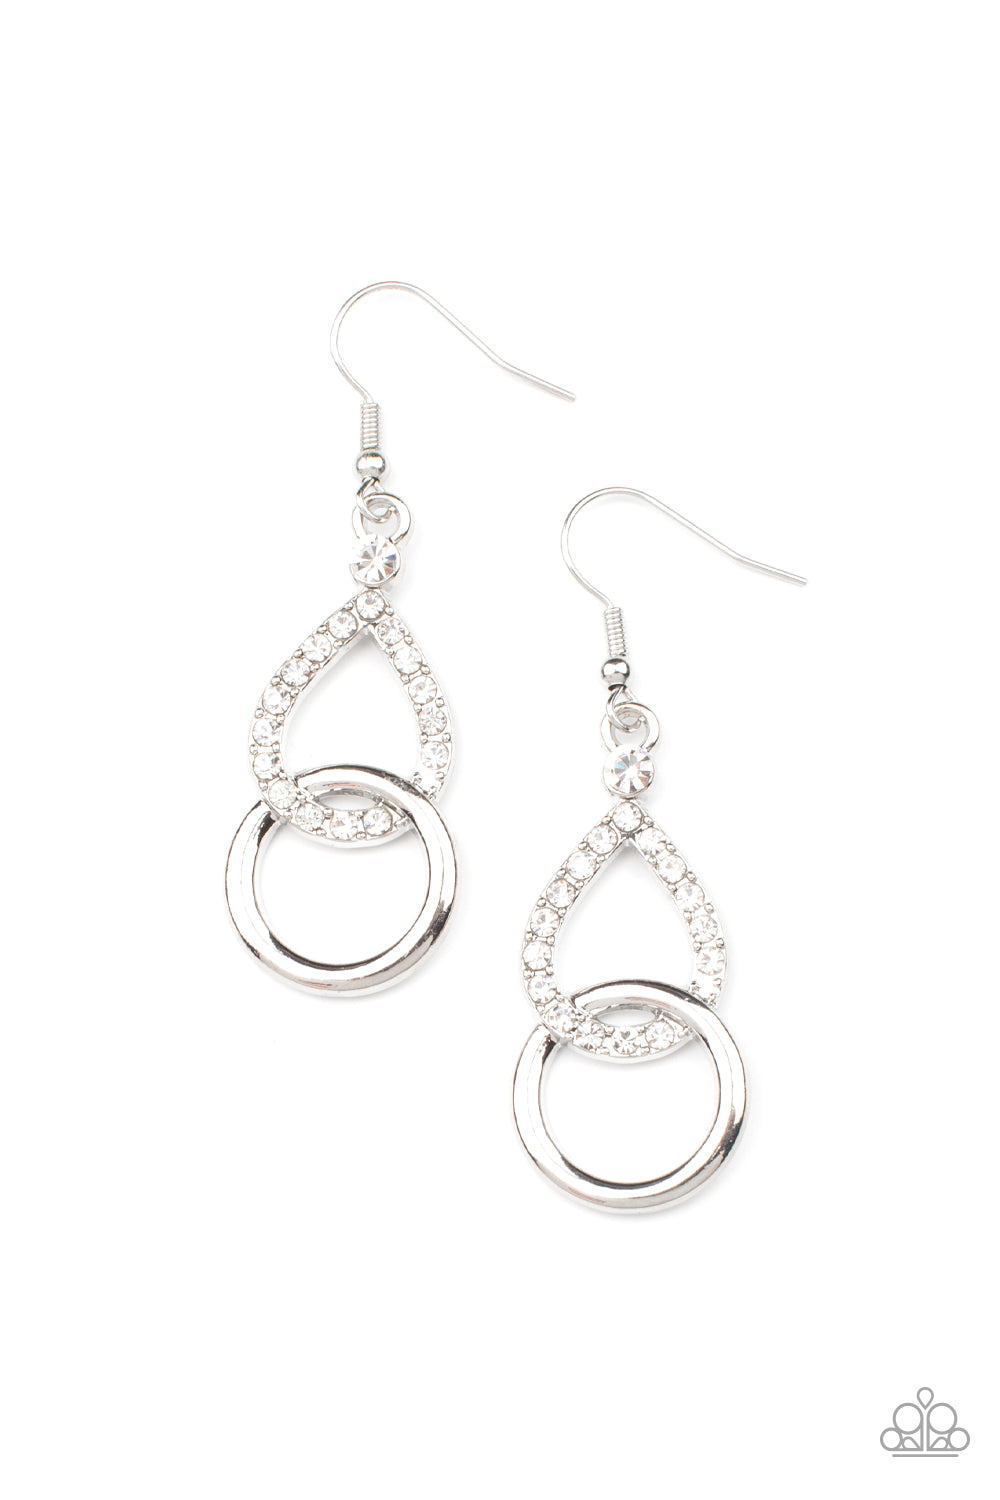 Paparazzi Accessories Red Carpet Couture - White Earrings